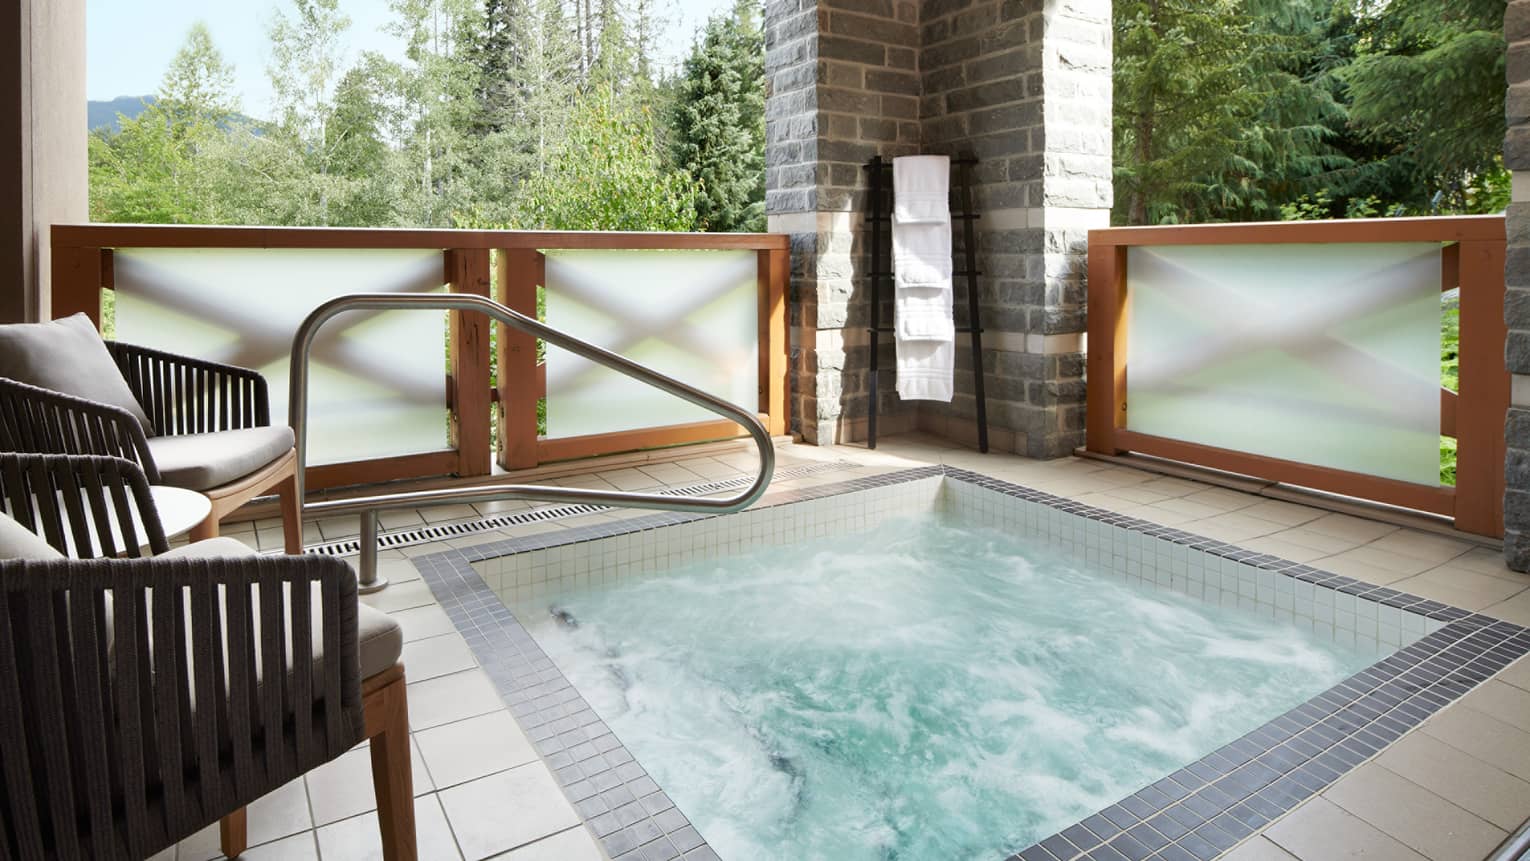 Luxurious private outdoor hot tub on the balcony of the Townhouse Suite at Four Seasons Whistler. The hot tub is surrounded by modern wood and glass railings that offer privacy while allowing views of the lush green forest surrounding the property. The area is equipped with dark wood lounge chairs for relaxation and a stone pillar that supports outdoor lighting, enhancing the serene and exclusive atmosphere.,Luxurious private outdoor hot tub on the balcony of the Townhouse Suite at Four Seasons Whistler. The hot tub is surrounded by modern wood and glass railings that offer privacy while allowing views of the lush green forest surrounding the property. The area is equipped with dark wood lounge chairs for relaxation and a stone pillar that supports outdoor lighting, enhancing the serene and exclusive atmosphere.